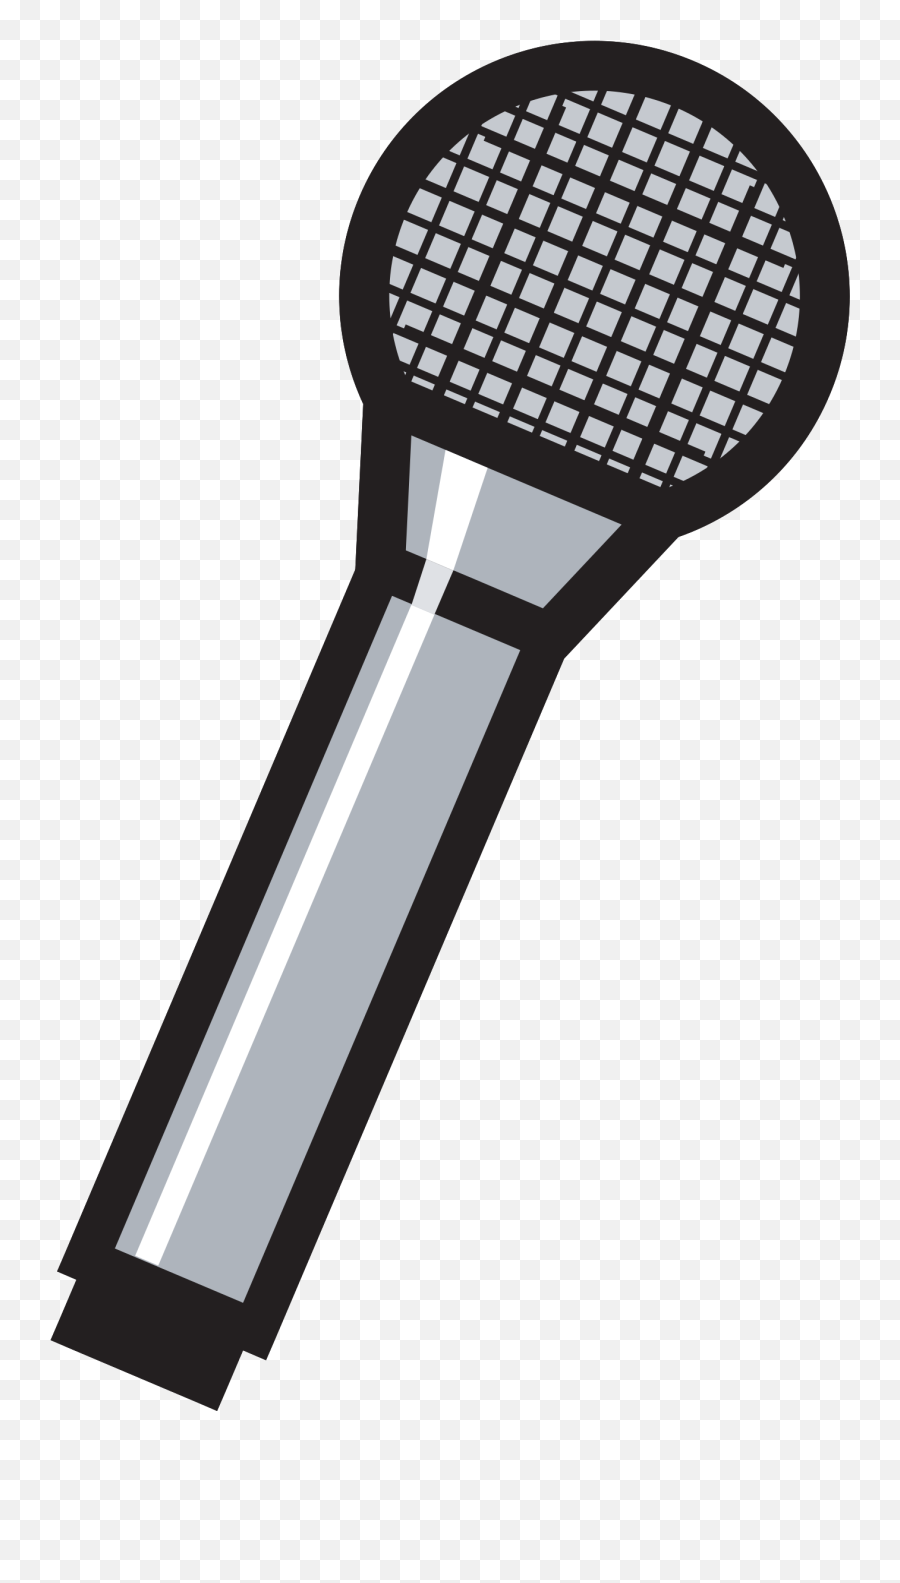 Free Microphone Cartoon Png With Transparent Background - Microphone Cartoon Emoji,Microphone Png